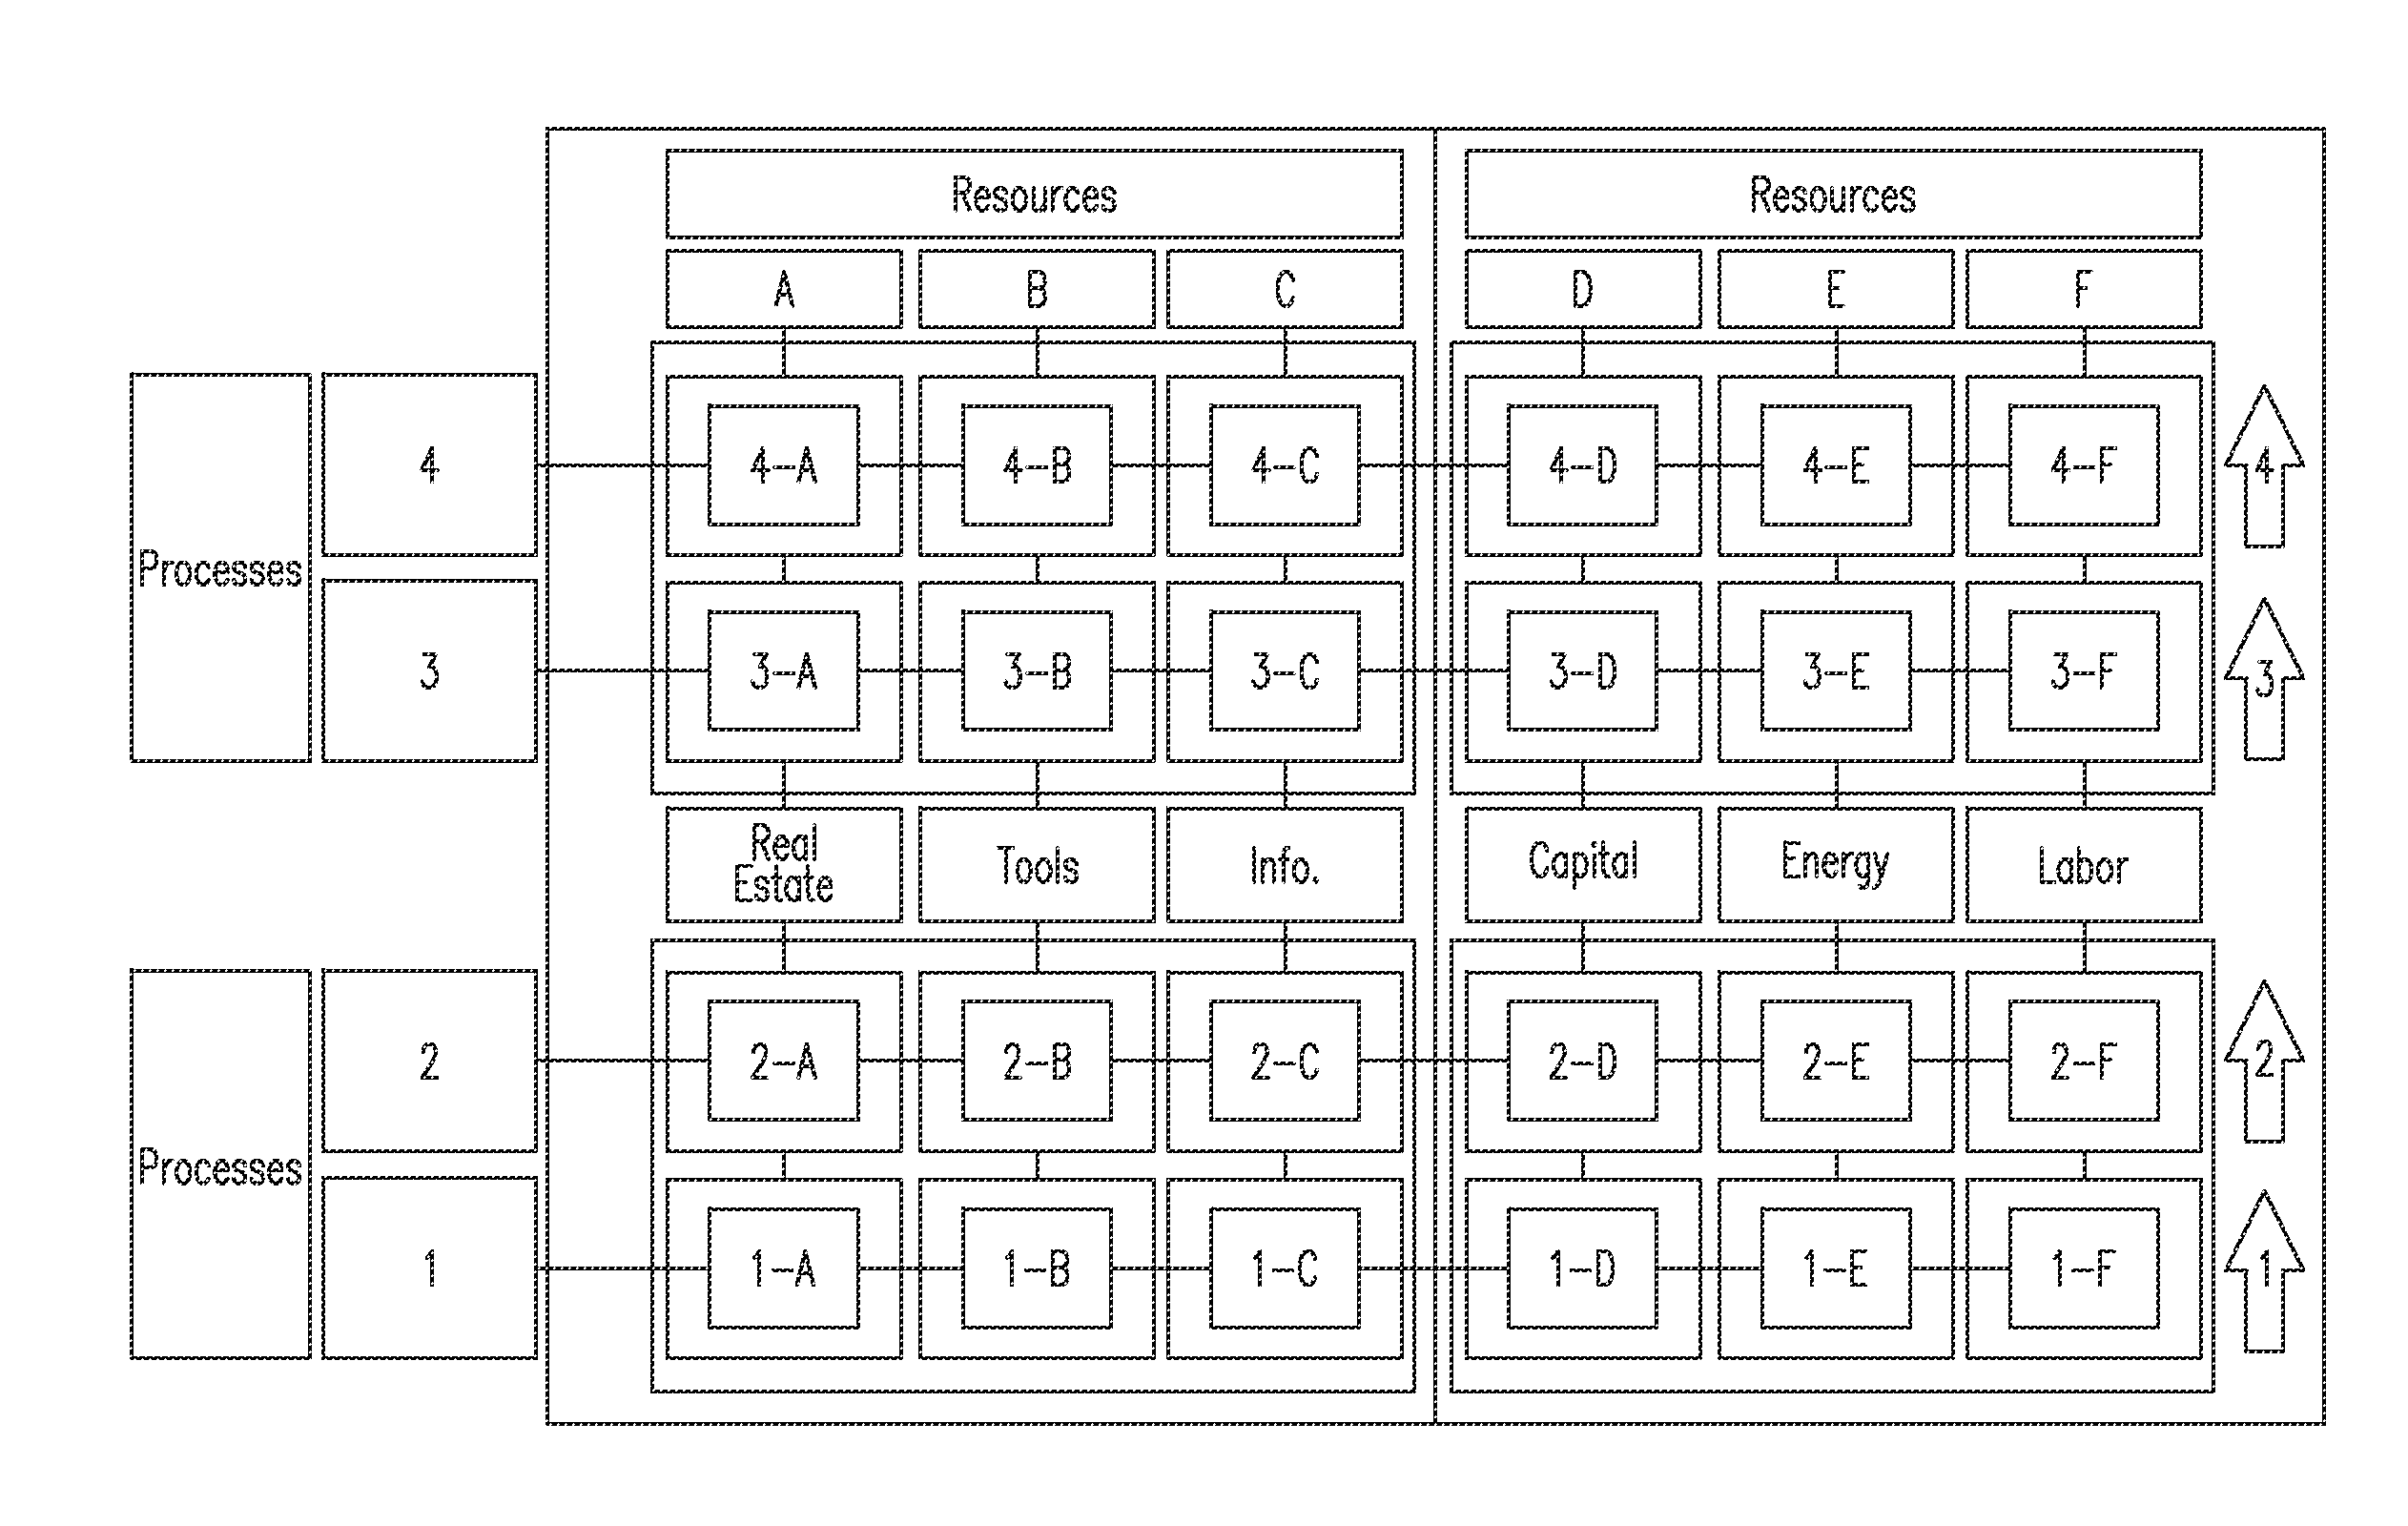 Domain-specific syntax tagging in a functional information system